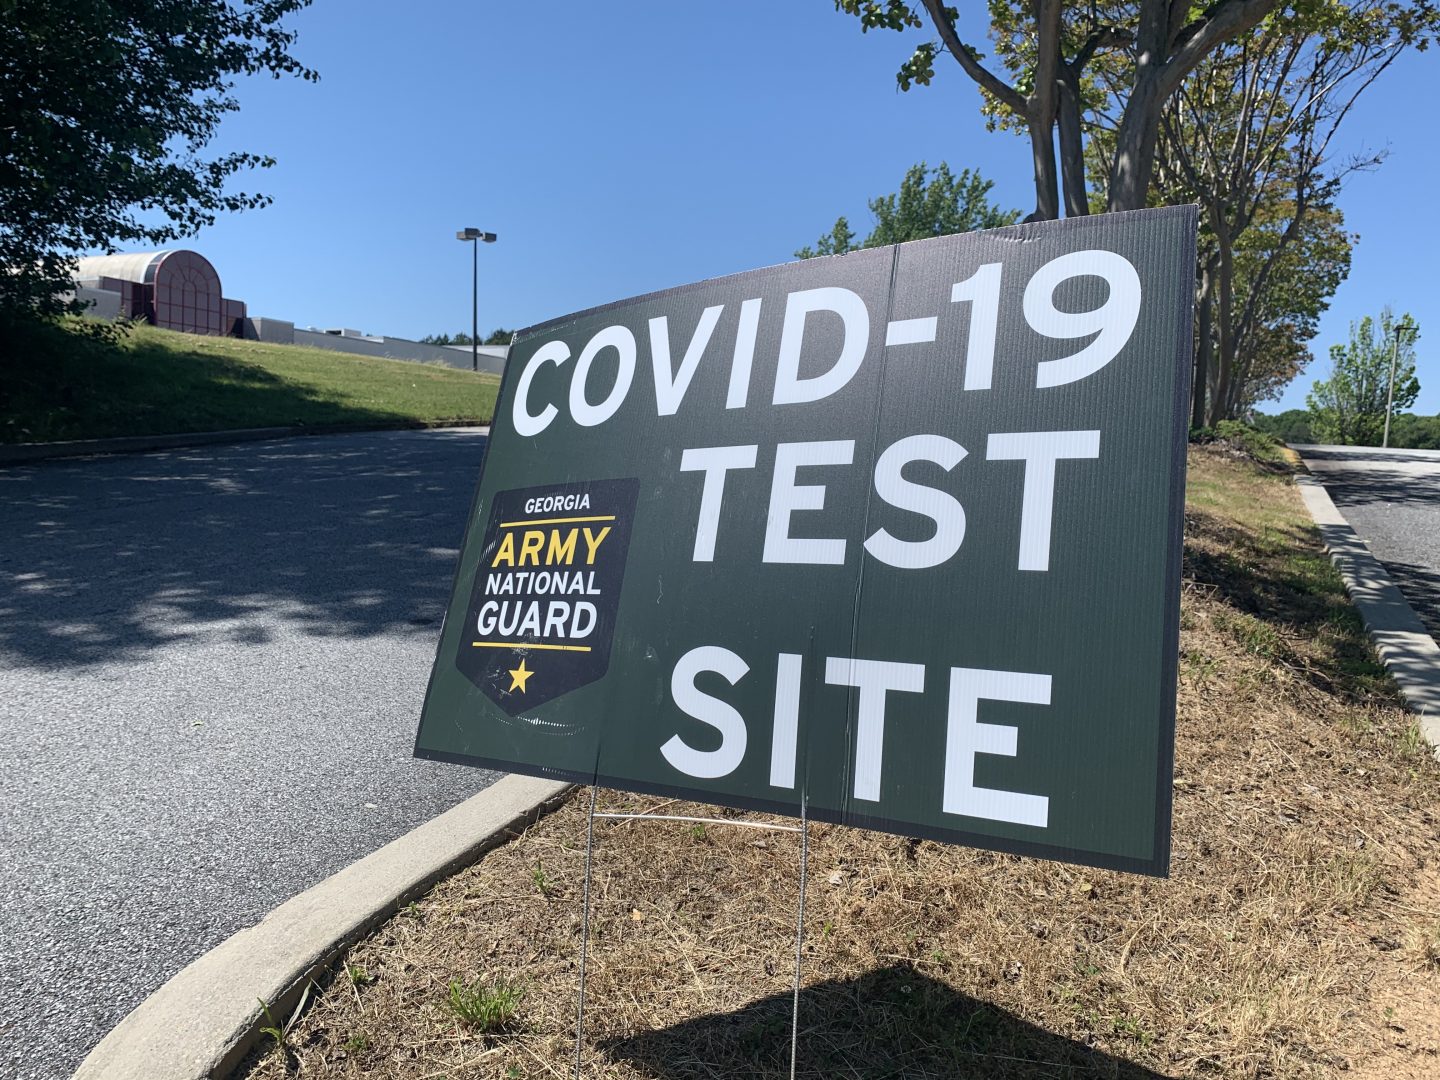 Tackling the COVID-19 vaccine hesitancy in the Black community